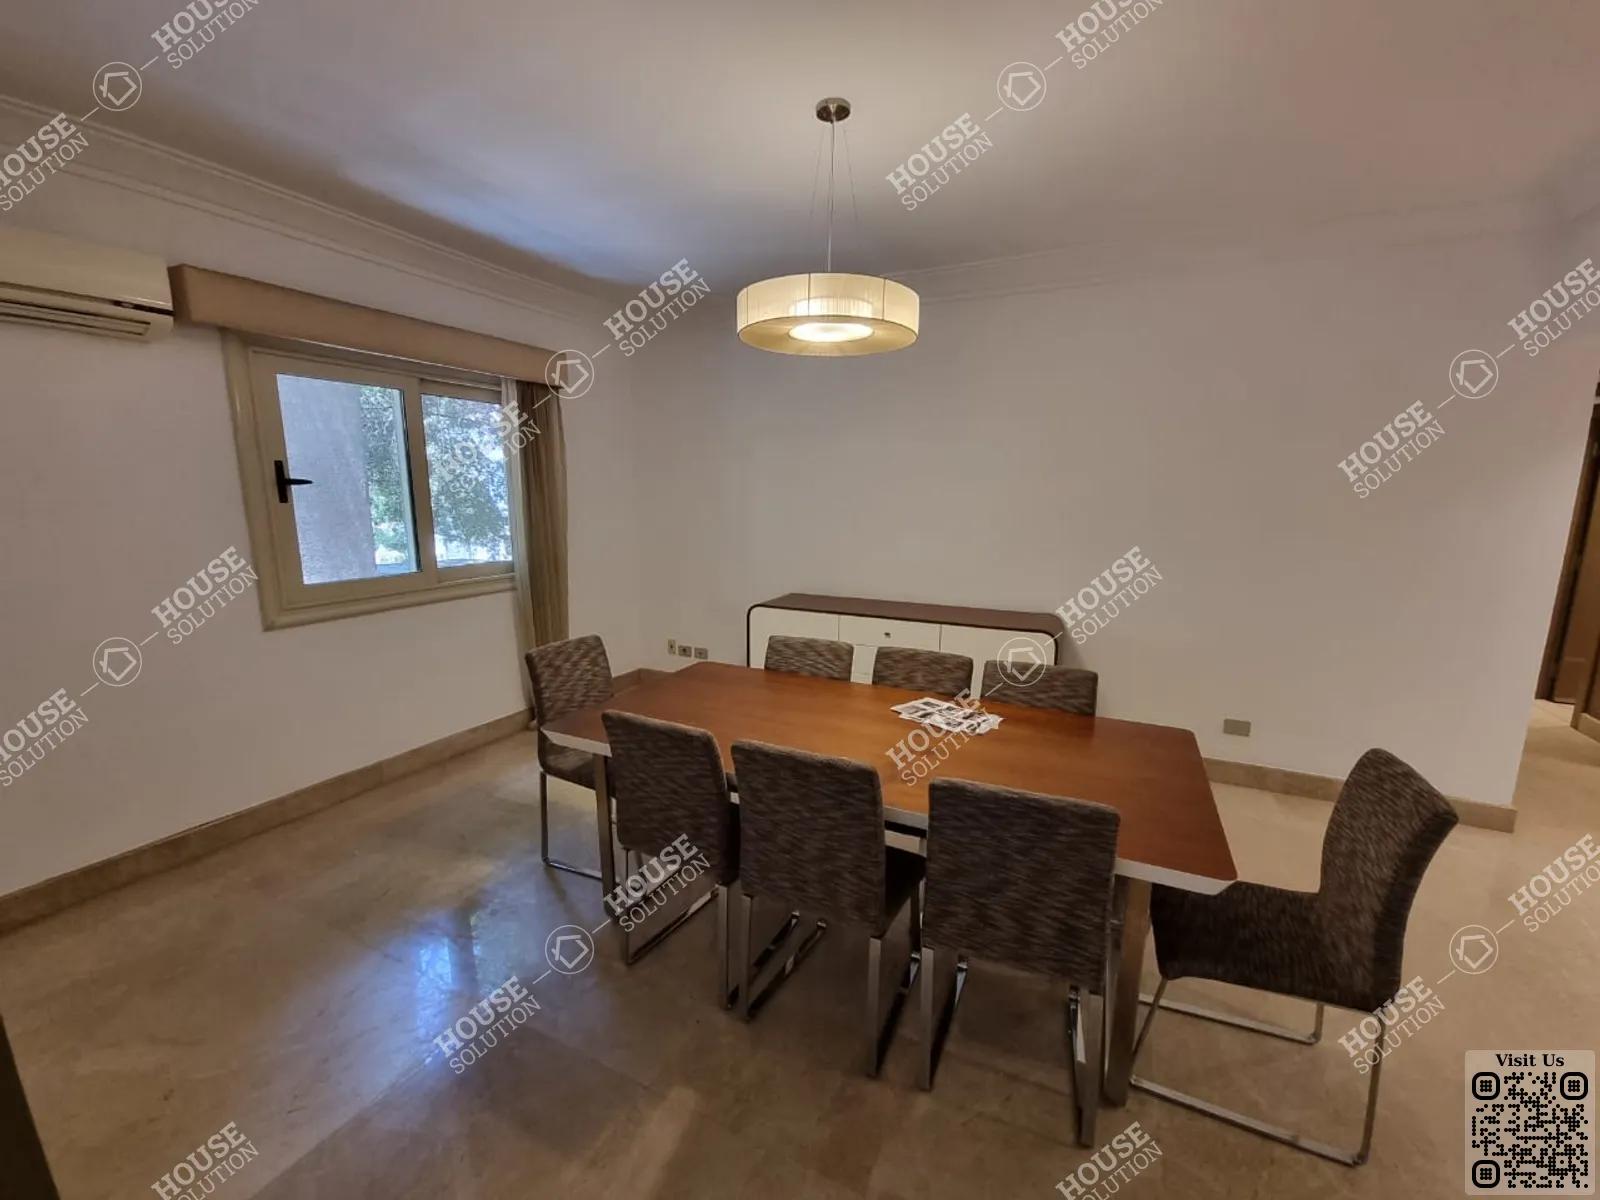 DINING AREA @ Apartments For Sale In Maadi Maadi Sarayat Area: 220 m² consists of 3 Bedrooms 3 Bathrooms Furnished 5 stars #5609-1